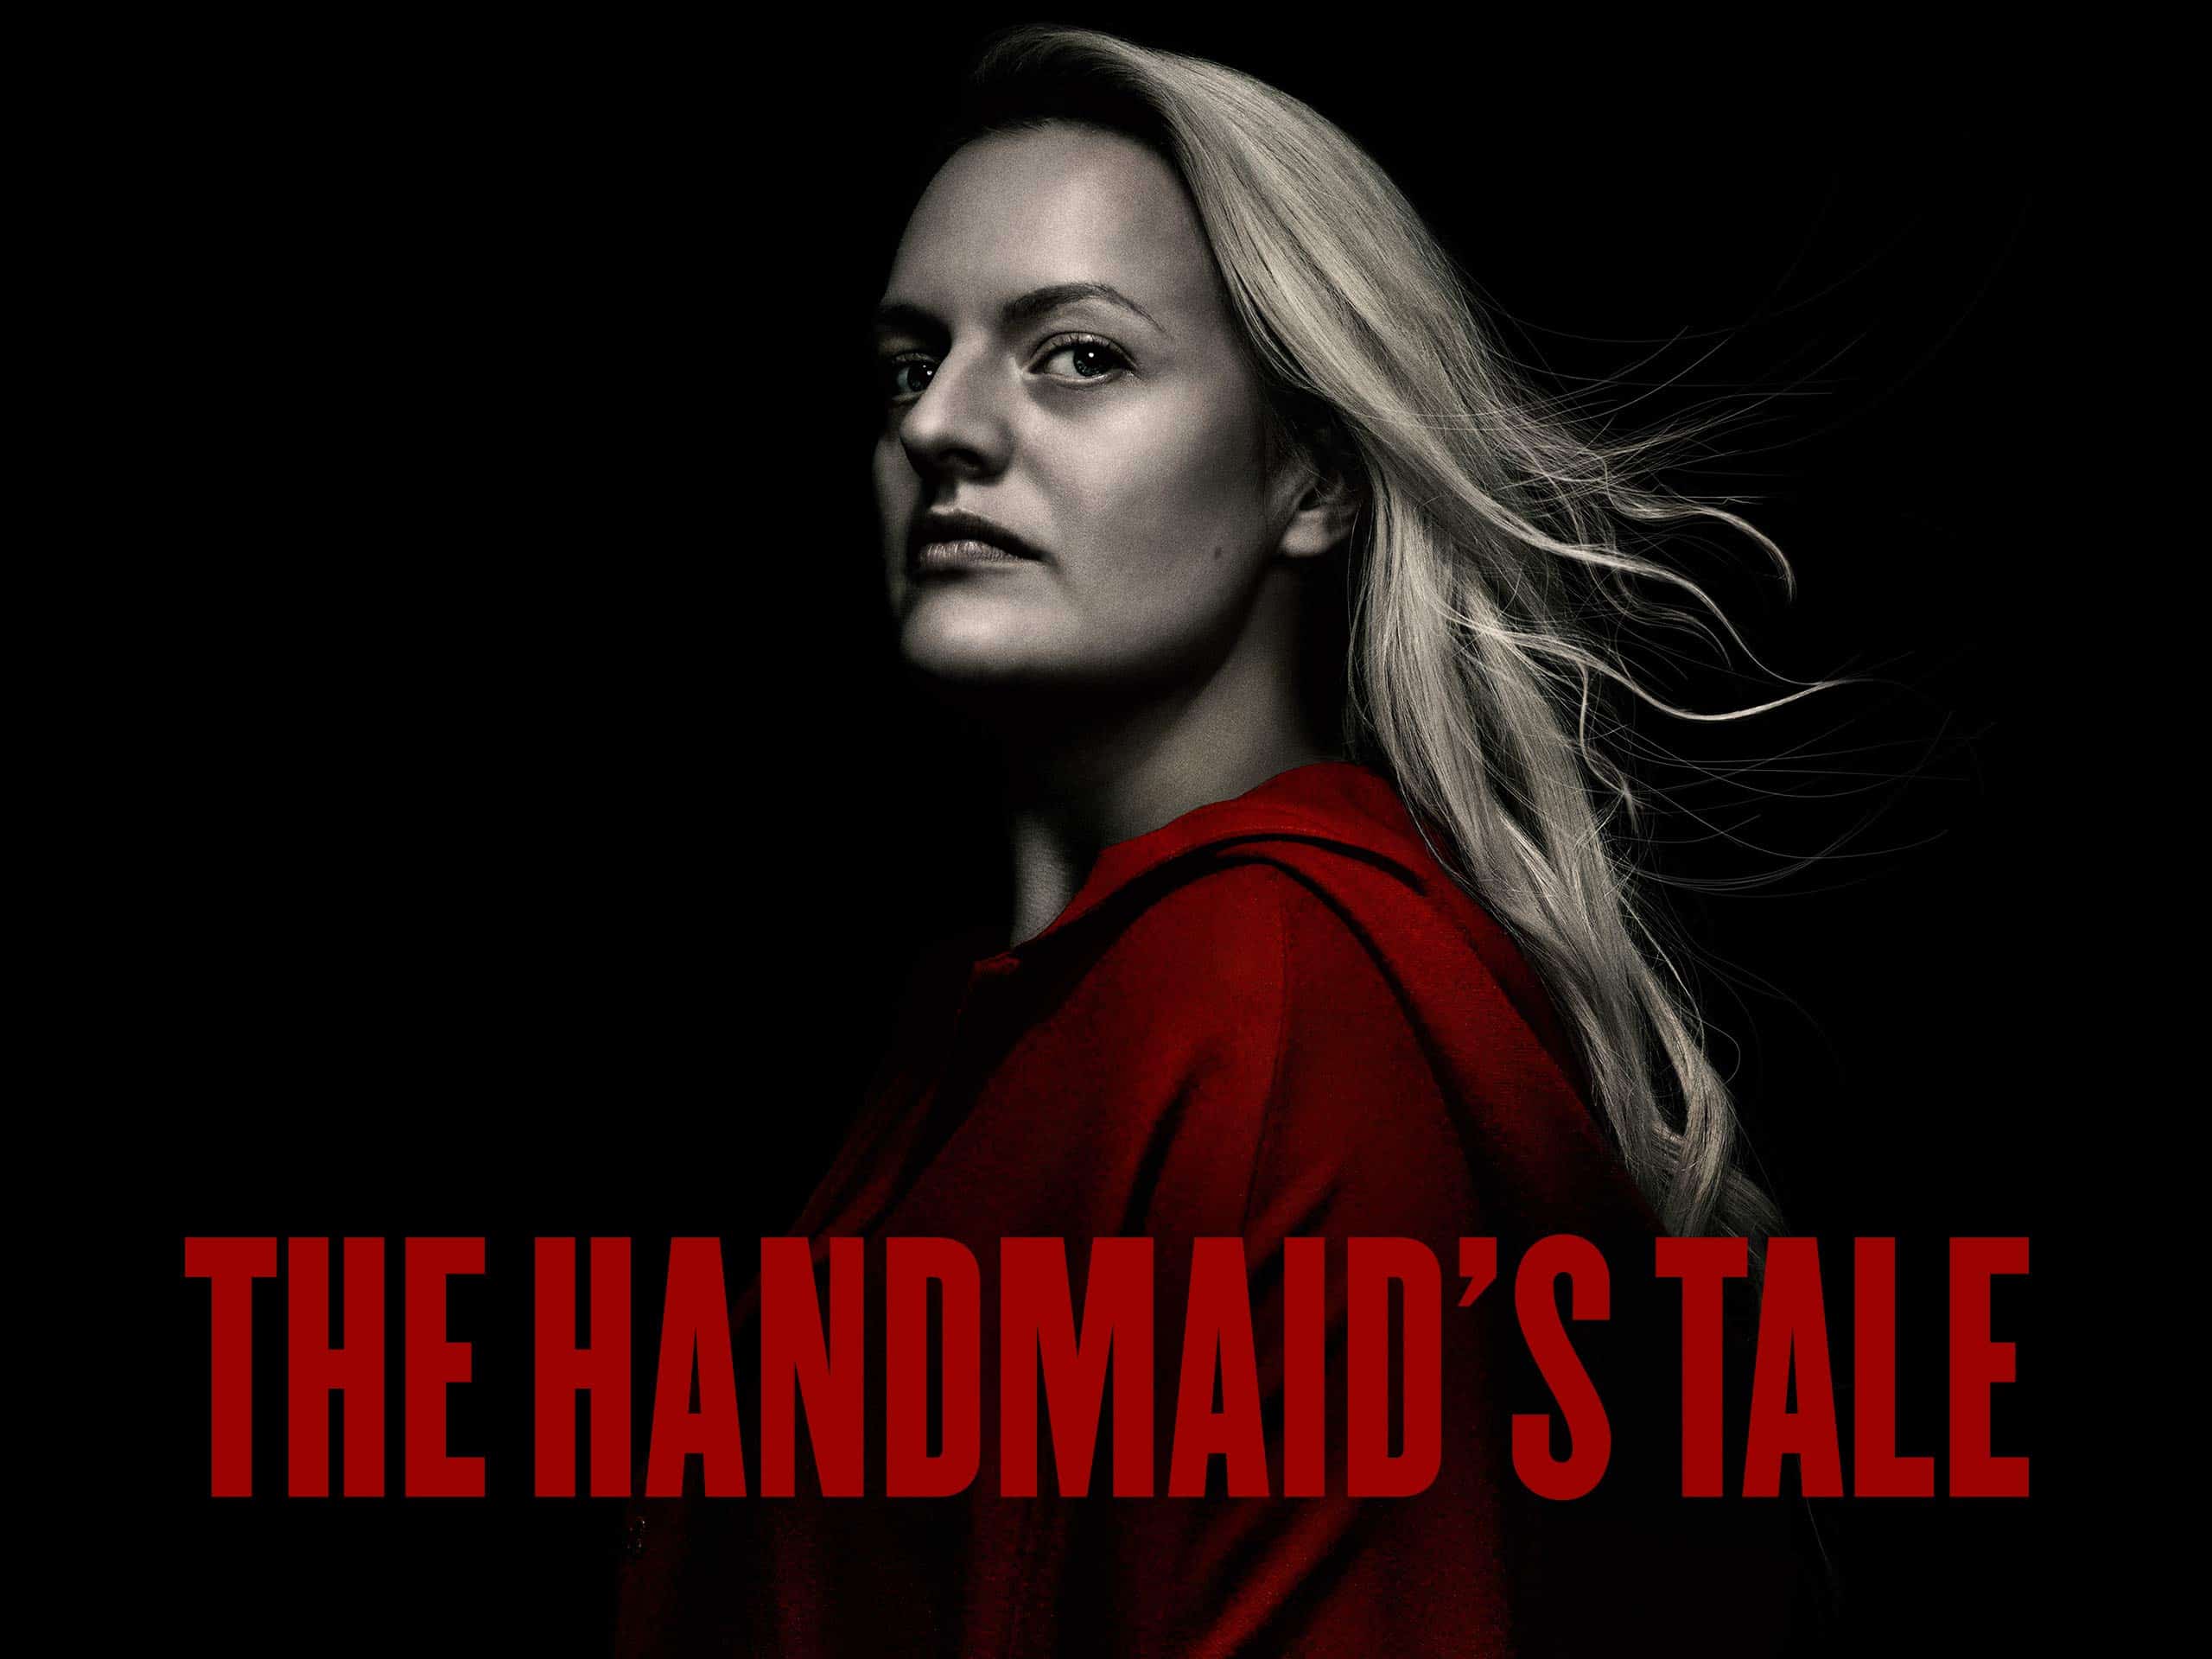 Season 5 of “The Handmaid’s Tale” (Release Date and Cast)